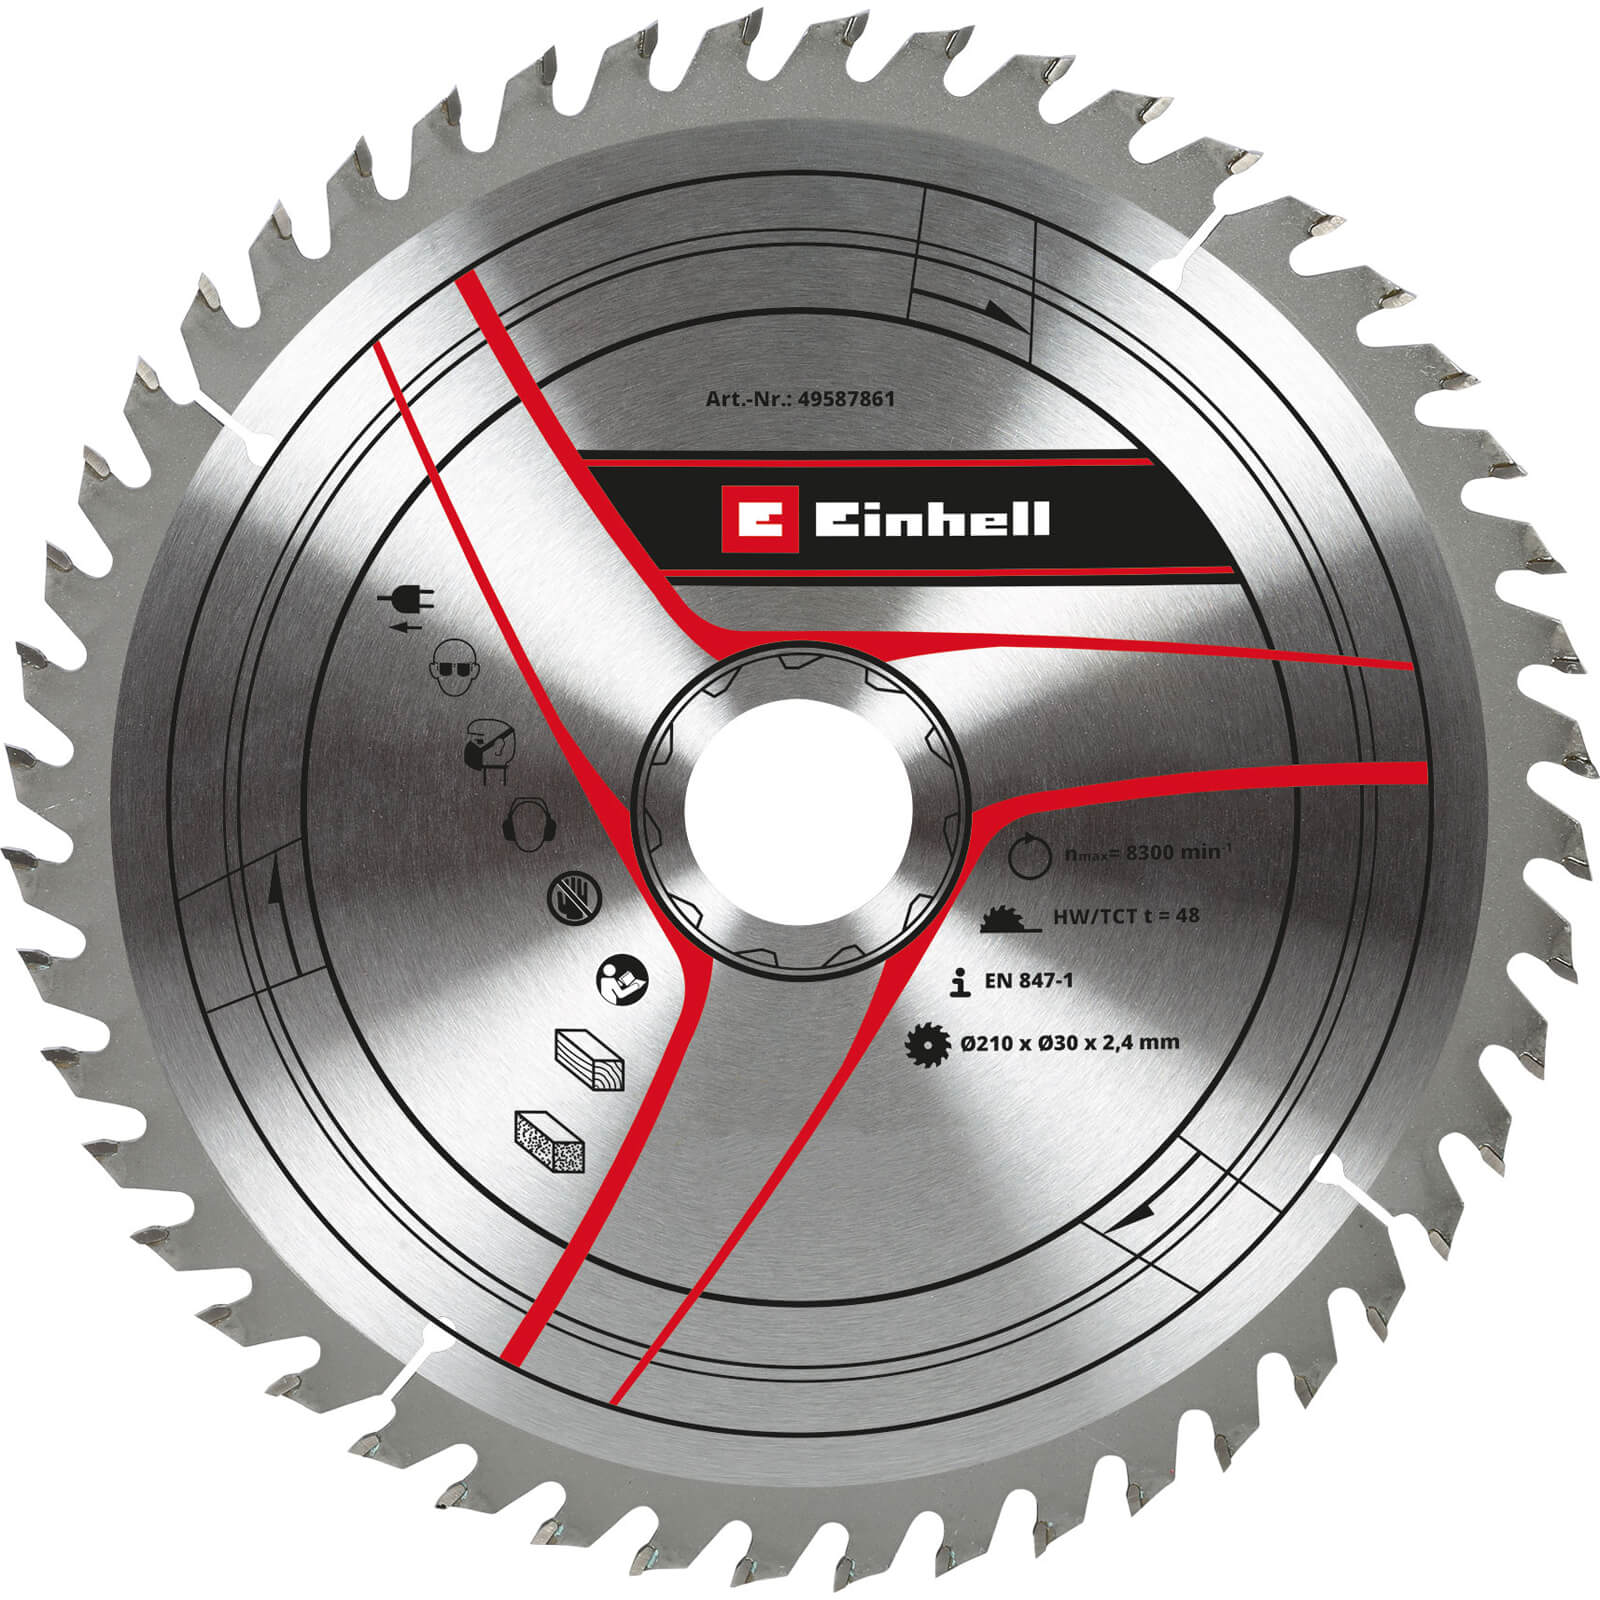 Image of Einhell TCT Circular Saw Blade 210mm 48T 30mm